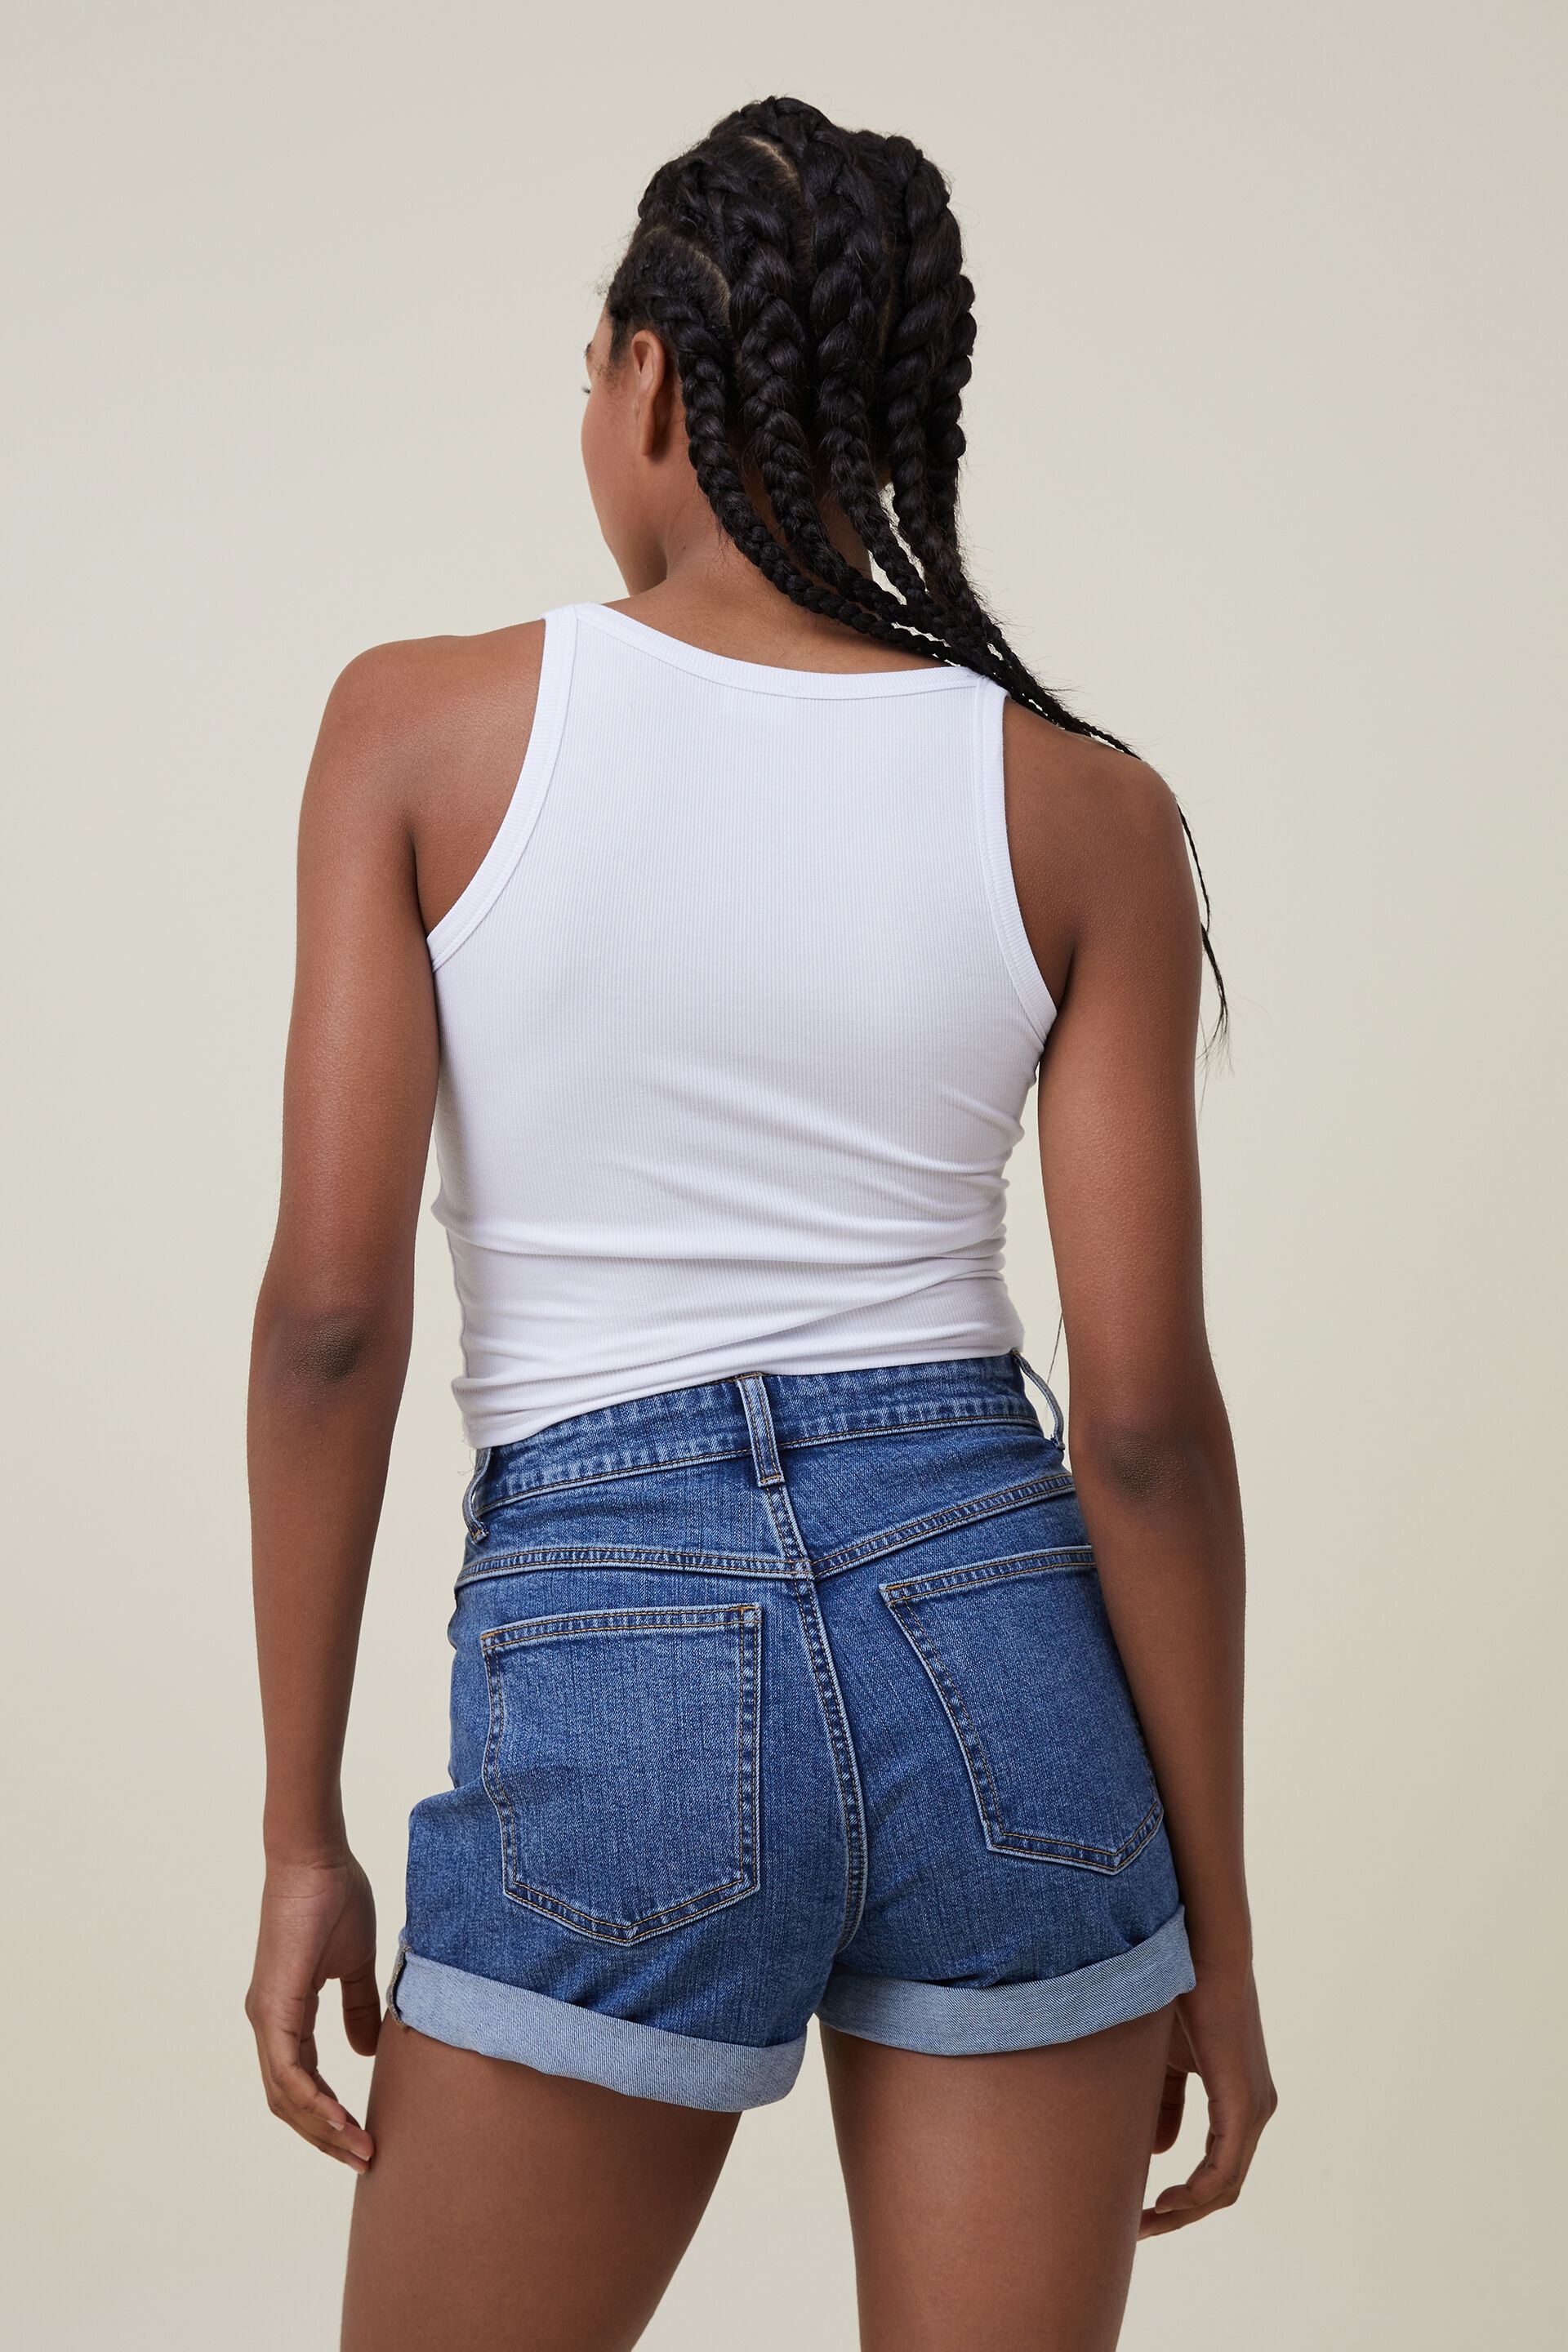 LowProfile High Waisted Denim Shorts for Women Butt Lift, India | Ubuy